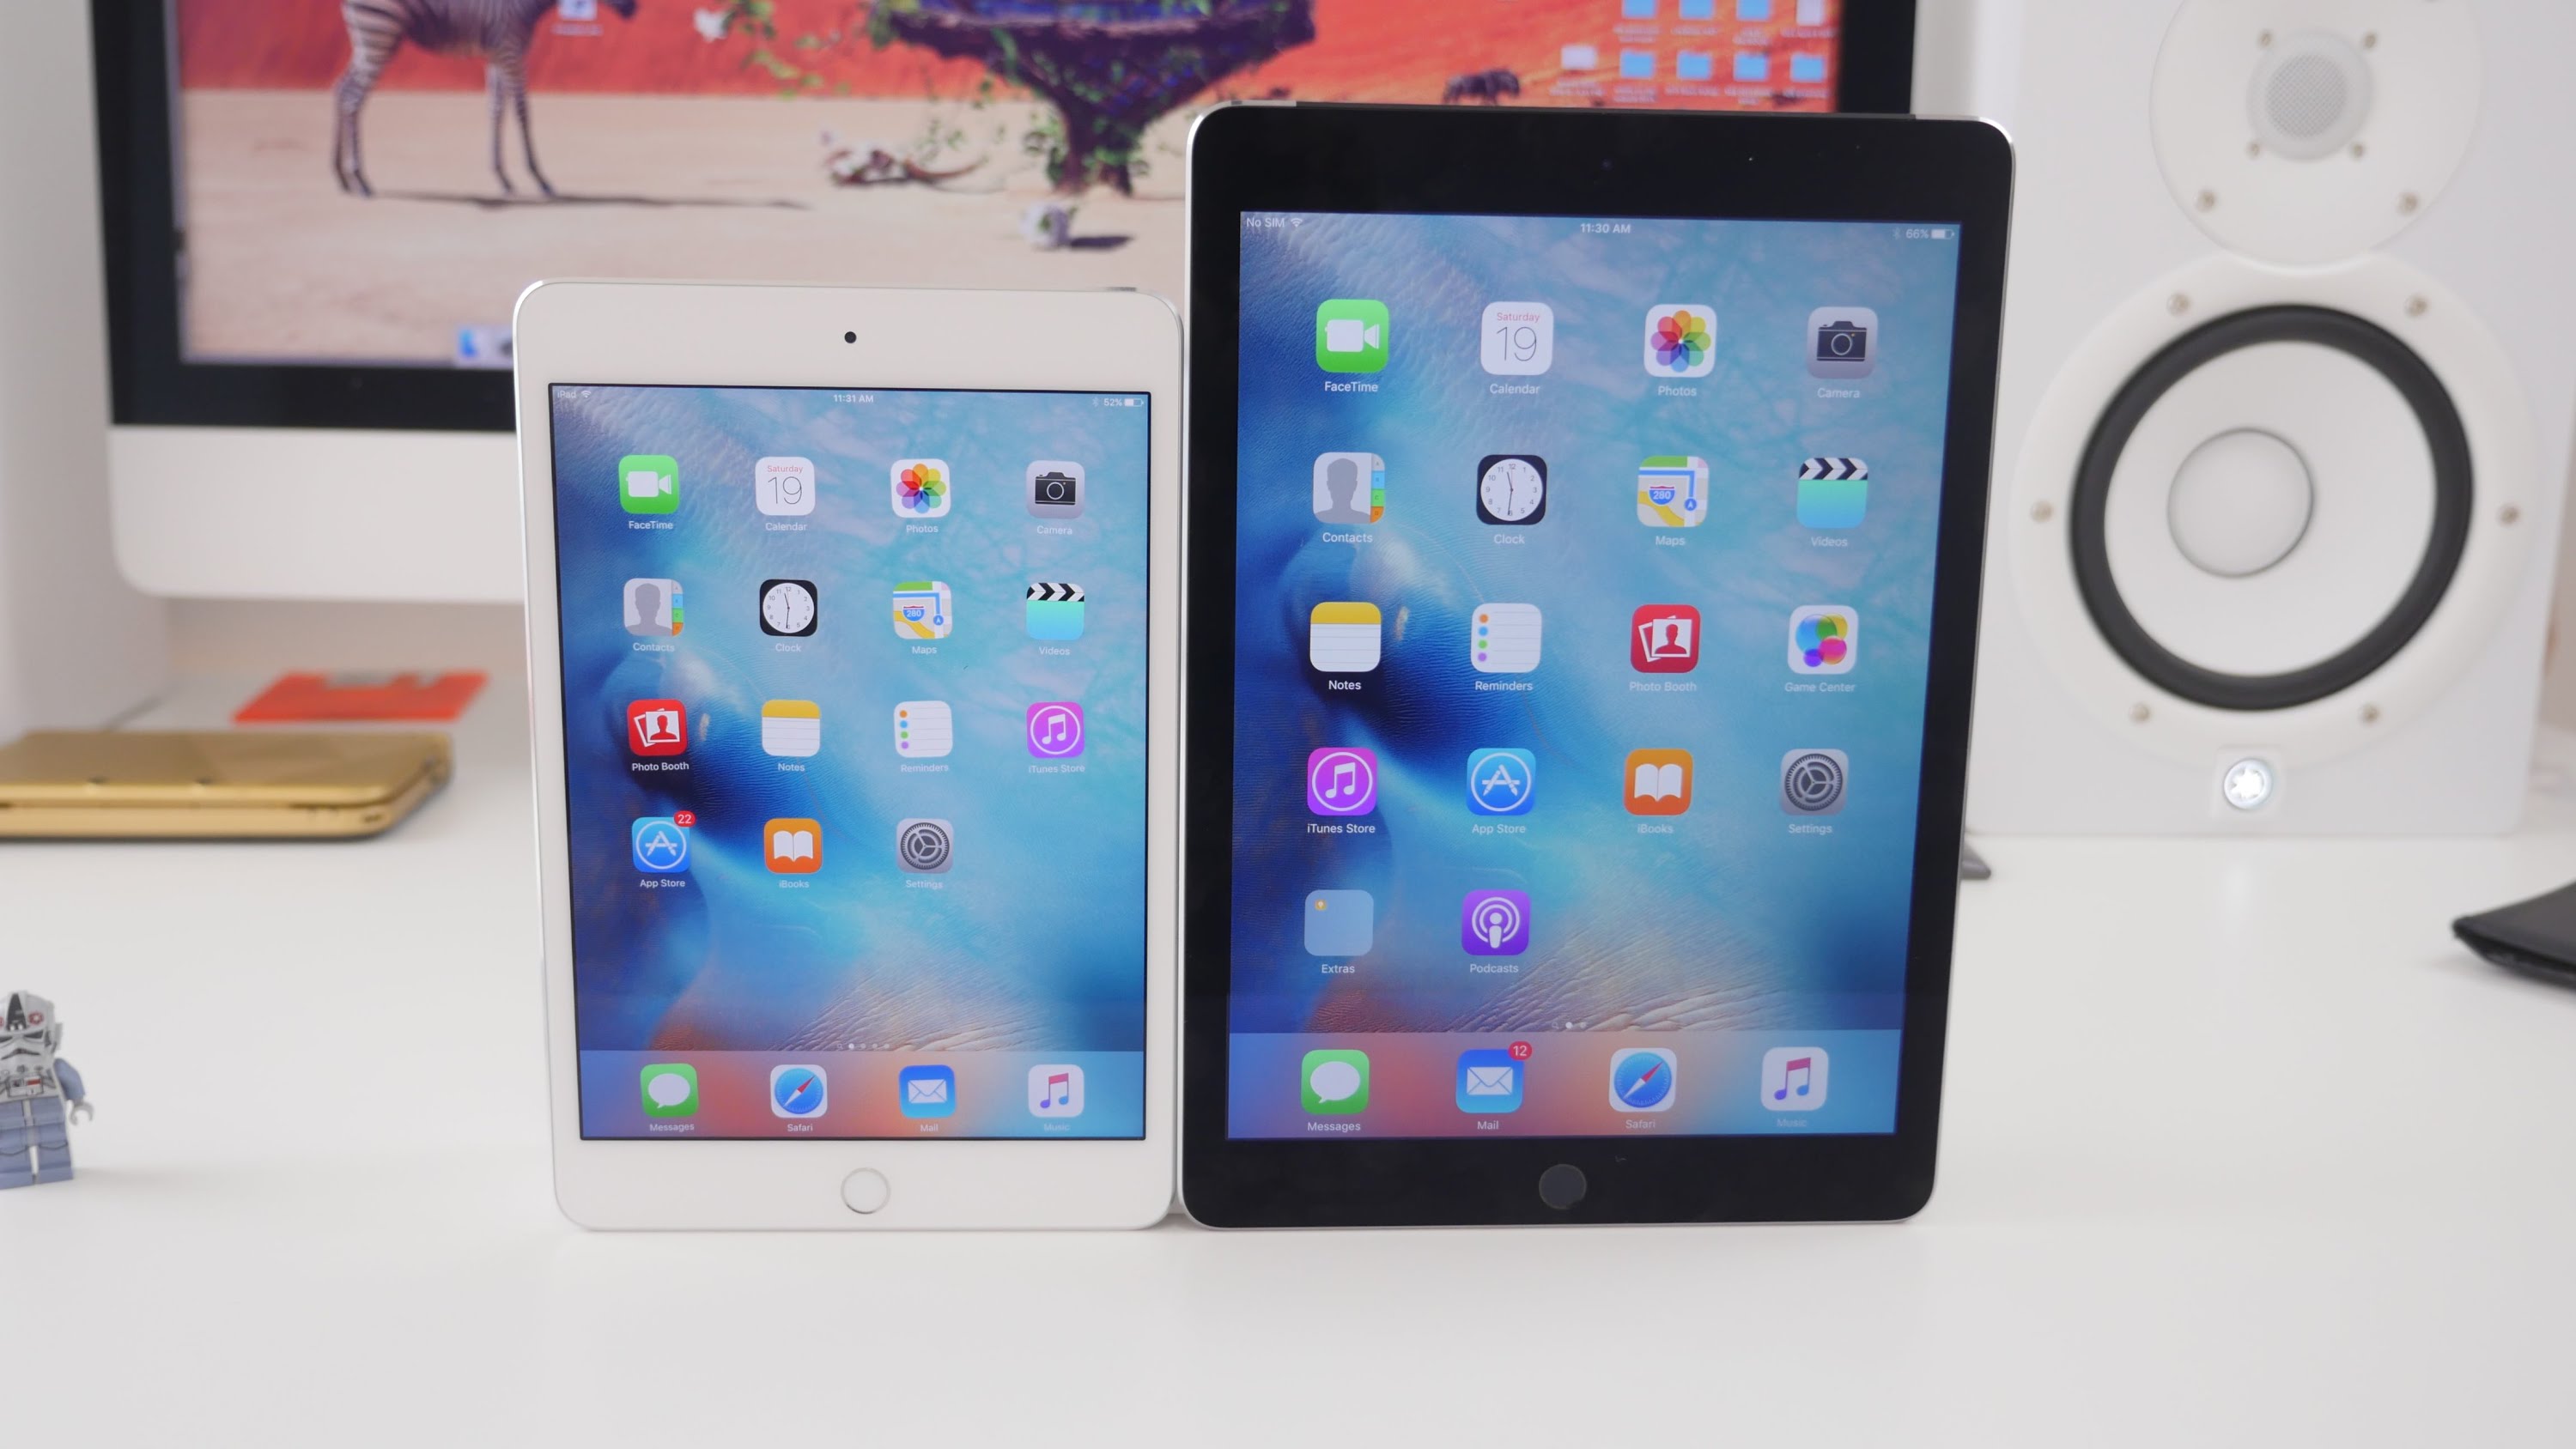 Apple Inc. recently released the powerful iPad Mini 4, but the release date of Ipad 3 Air mini 3 is still kept under wraps. Now we'll give the updates, rumors and specs of the latest gadgets from Apple.